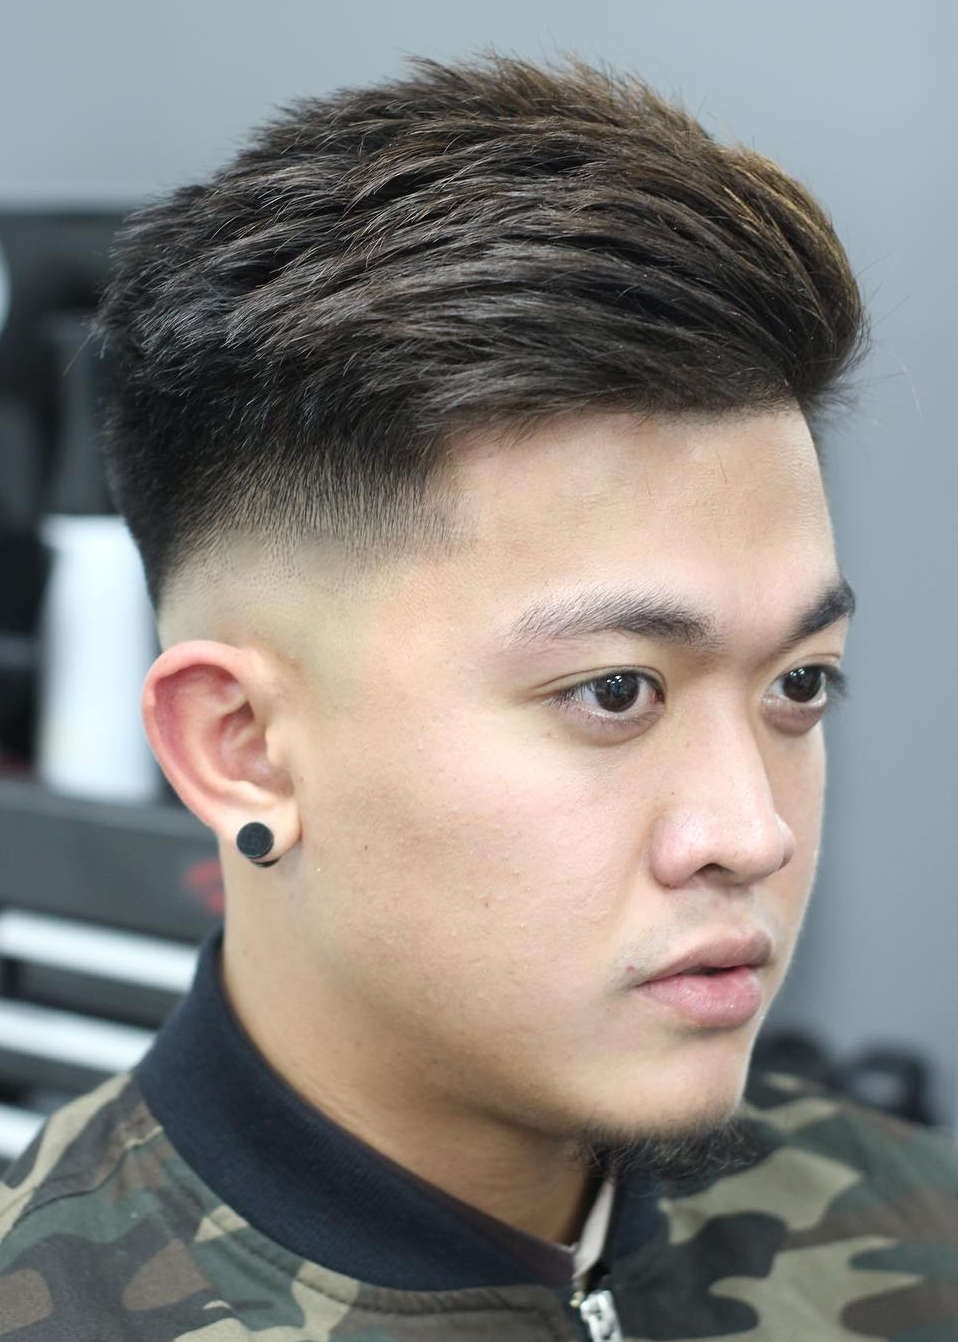 Top 30 Trendy Asian Men Hairstyles 2019 with Premier Asian Short Straight Hairstyles